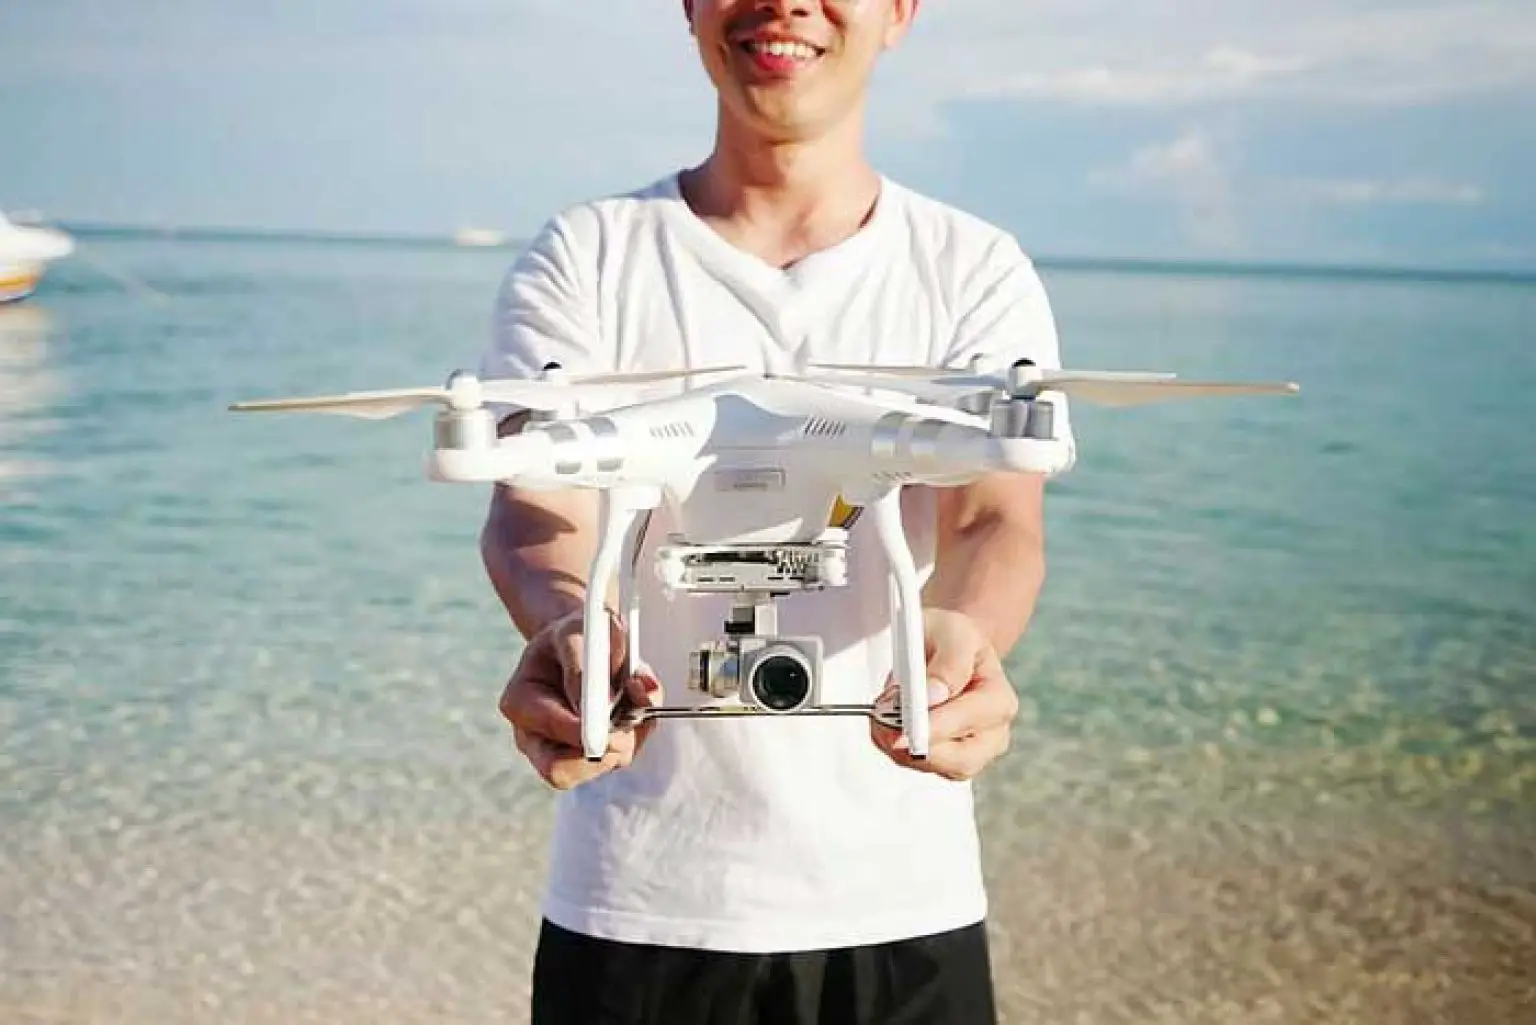 Fishing Drones What It Is? How It Works? Best Drones